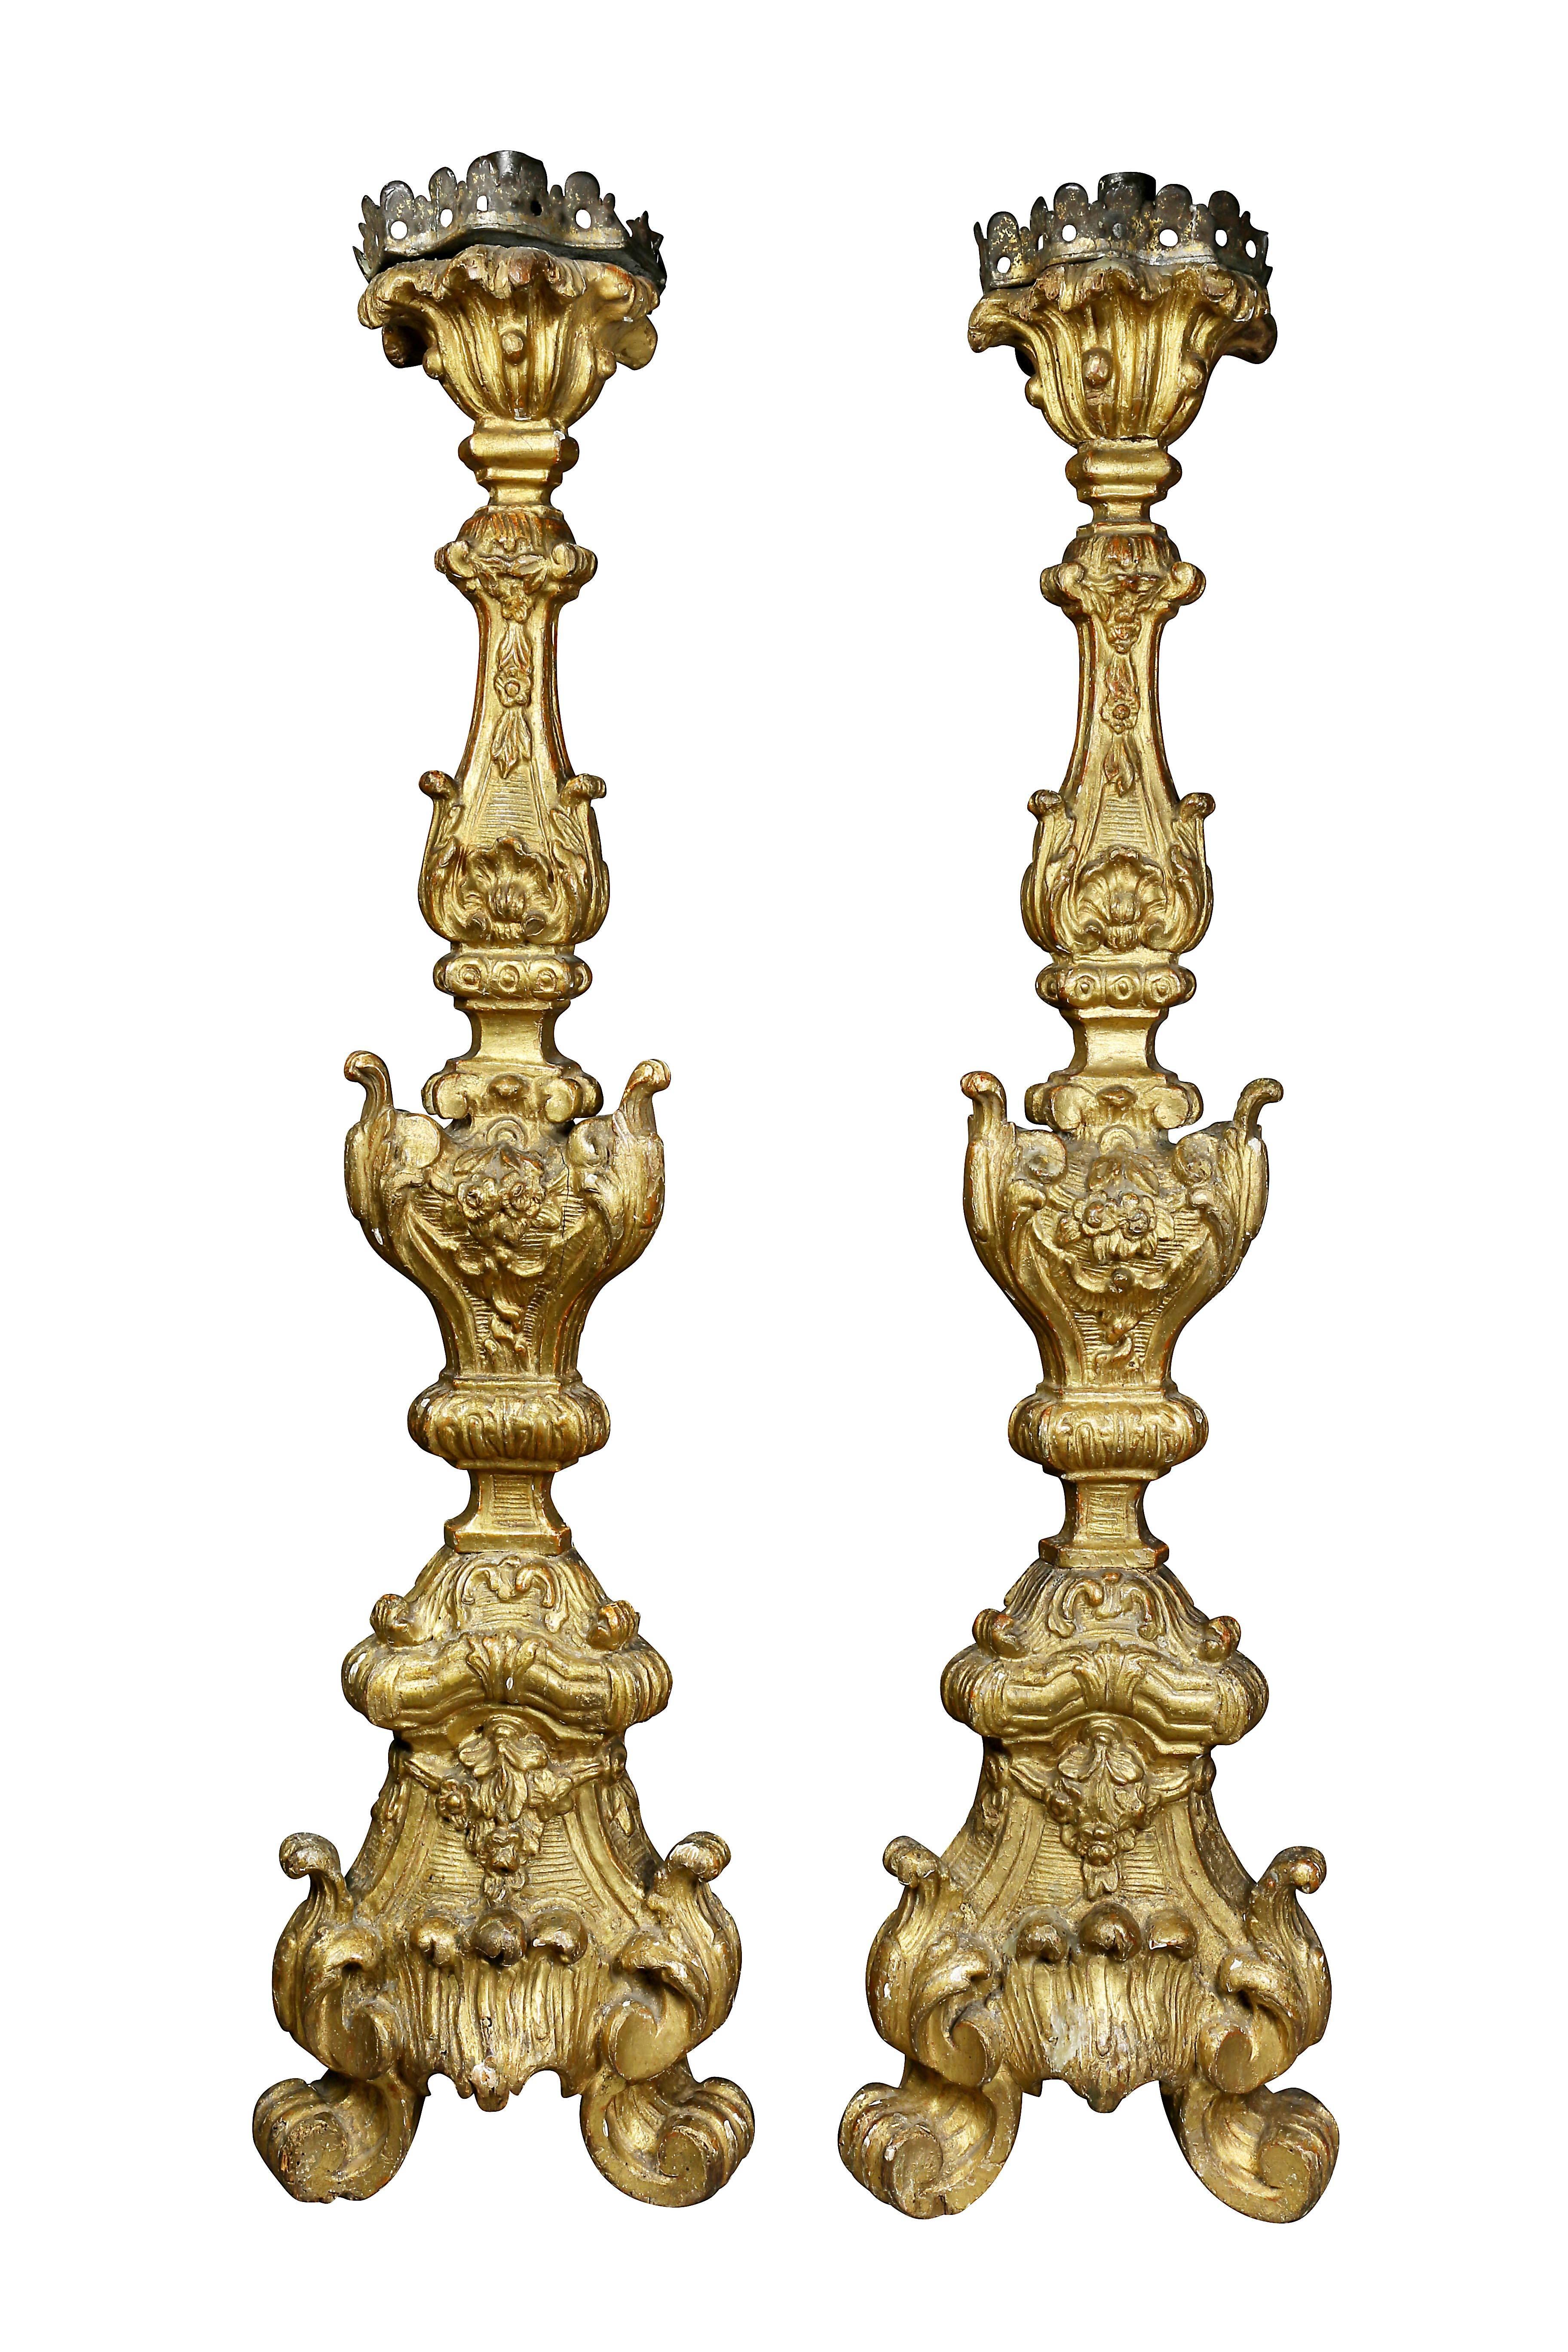 Each with original gilded decoration decorated with shell and acanthus leaf scrolls, floral swags etc.